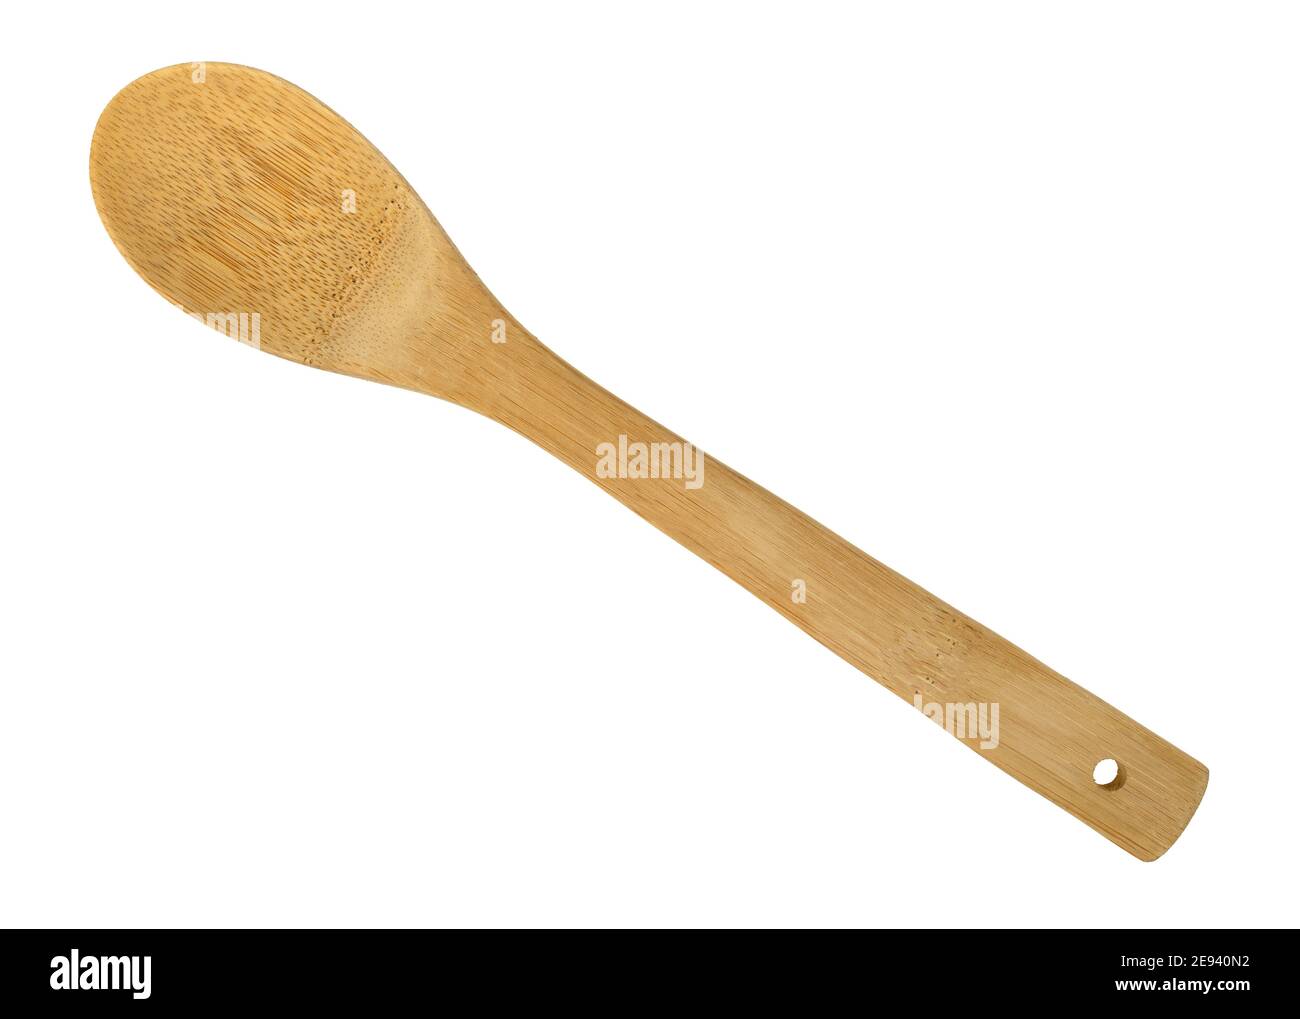 Top view of a large wood spoon isolated on a white background. Stock Photo